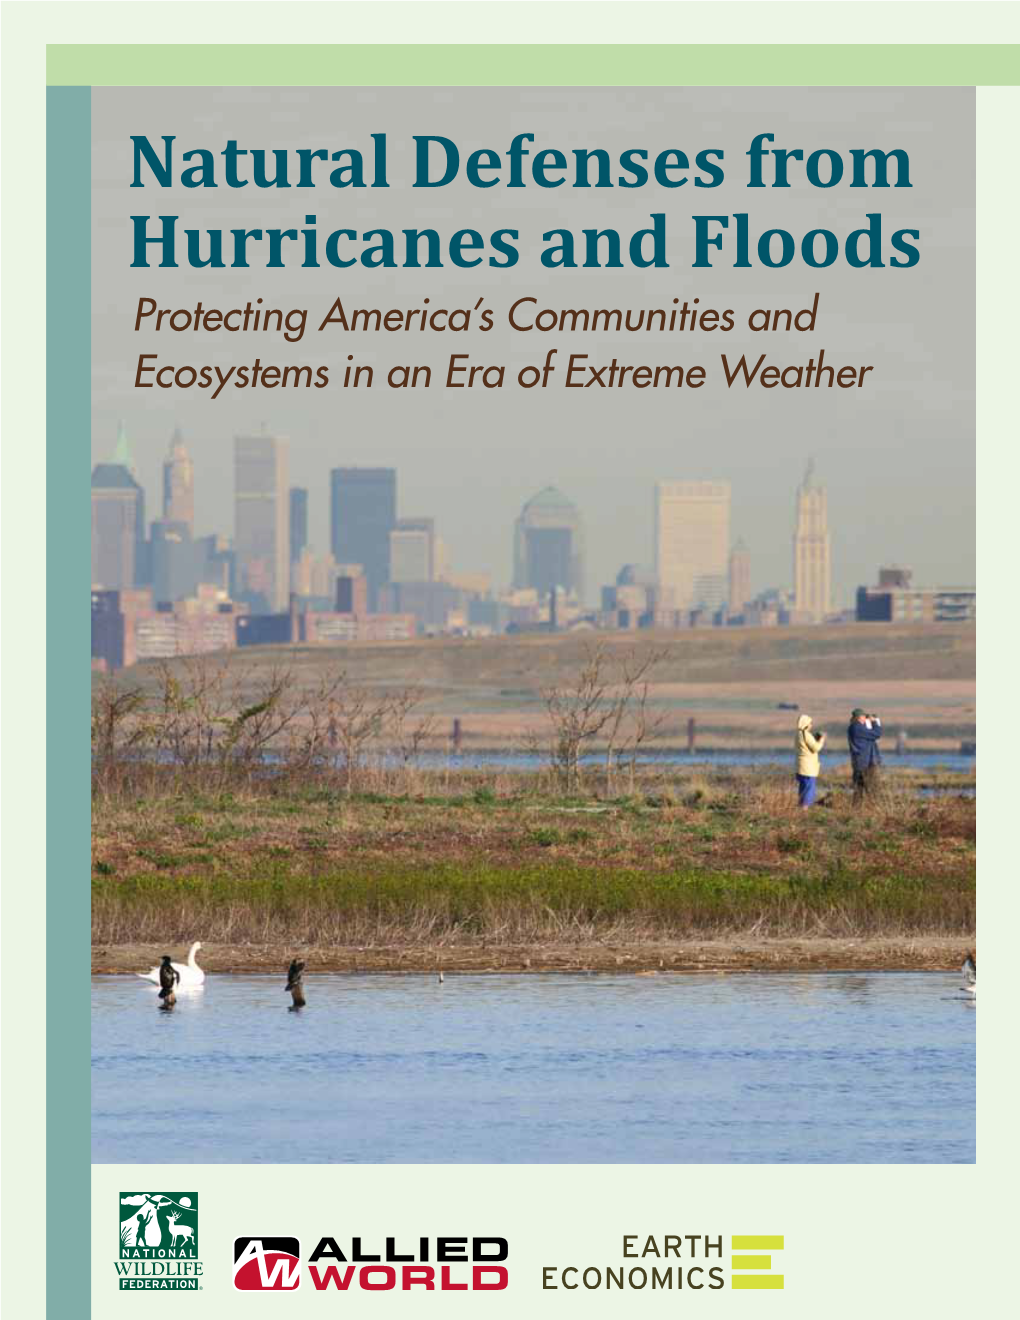 Natural Defenses from Hurricanes and Floods: Protecting America's